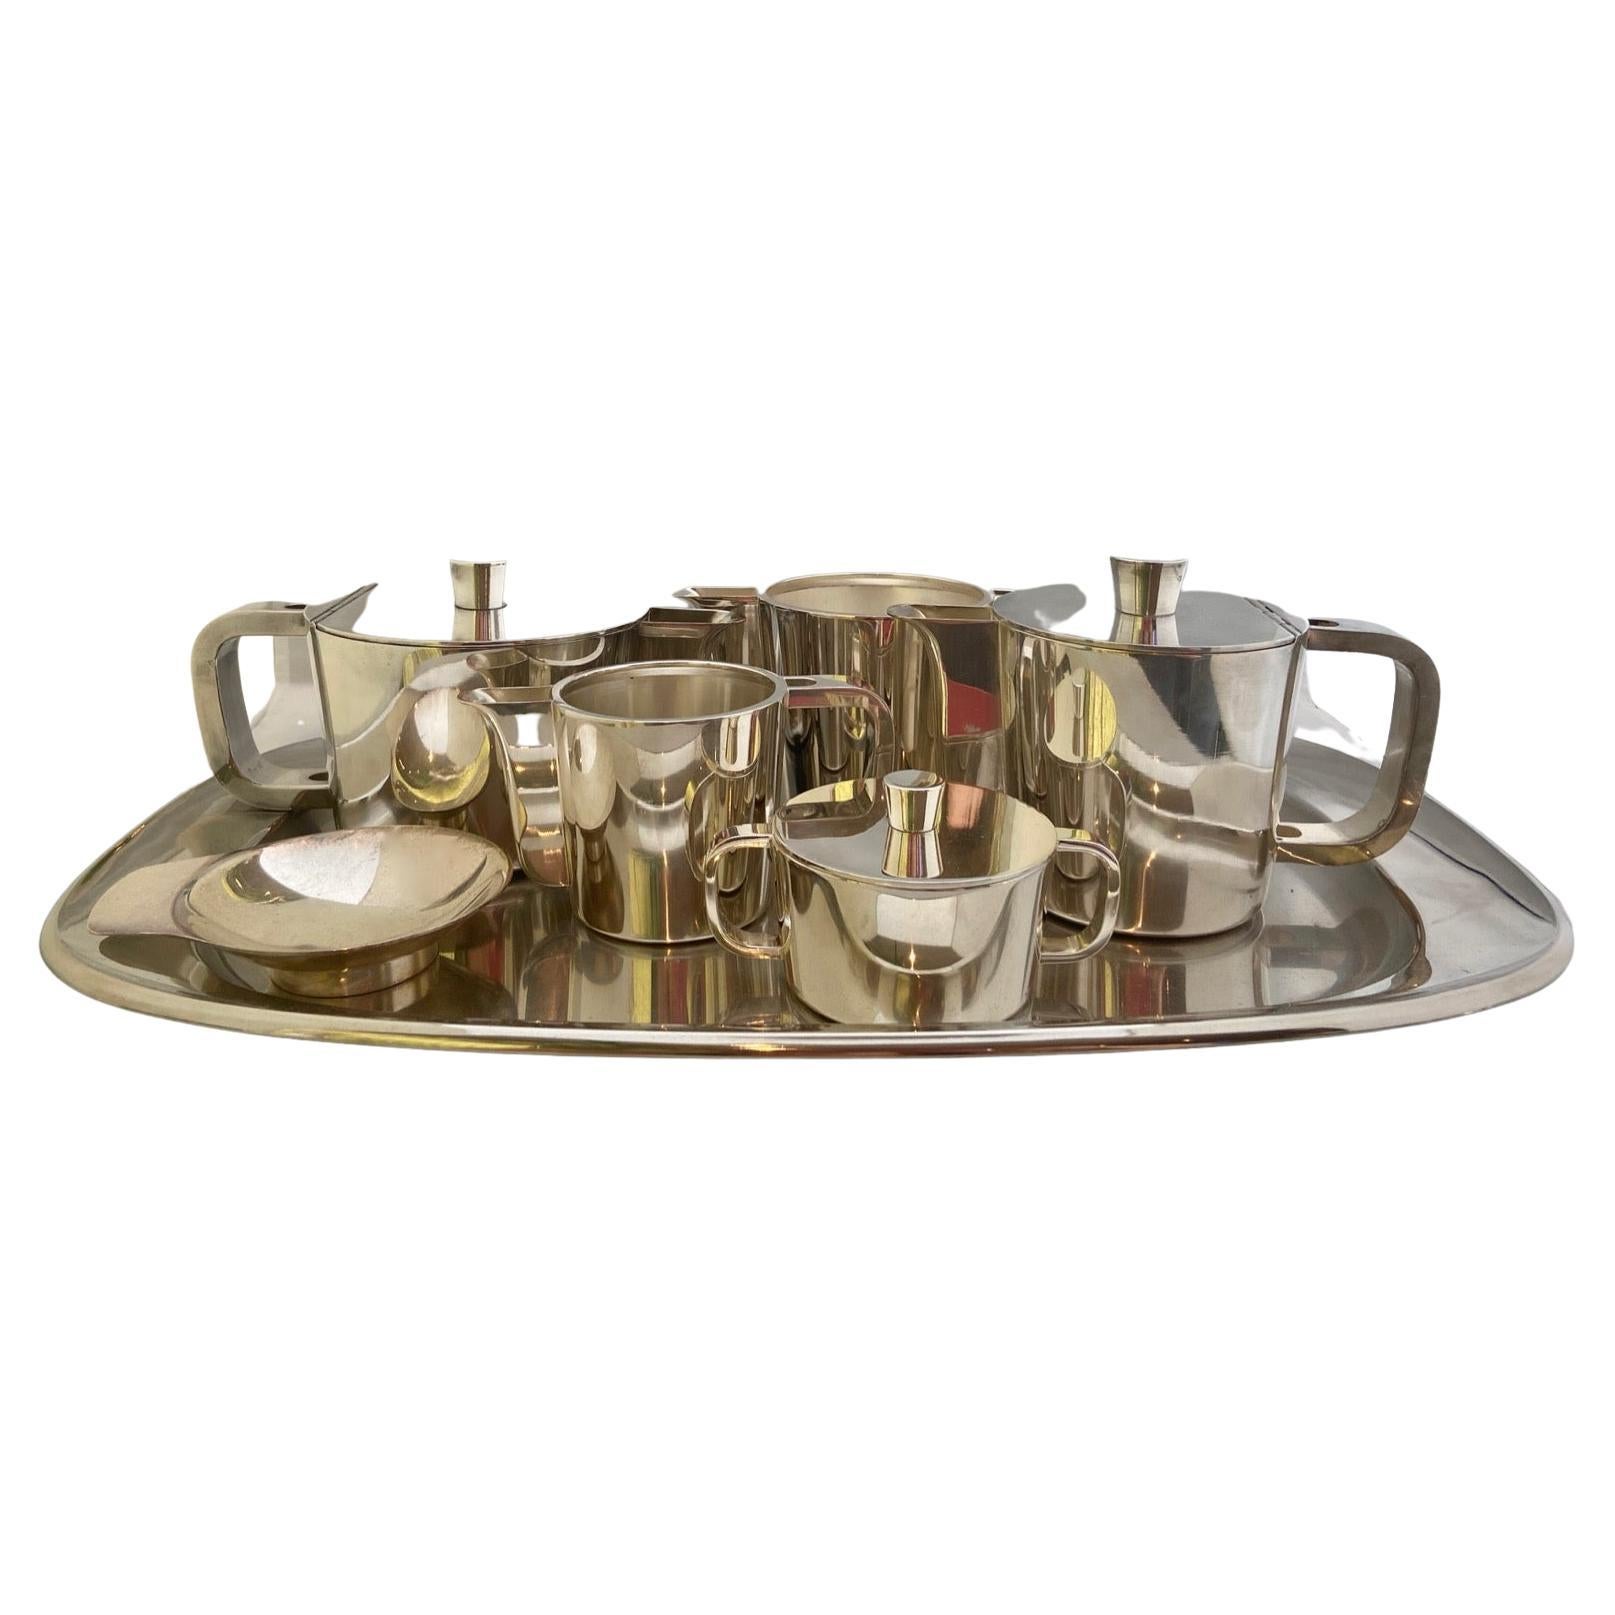 Extensive Silver Plated Gio Ponti Coffee and Tea Set on a Tray, Arthur Krupp 2